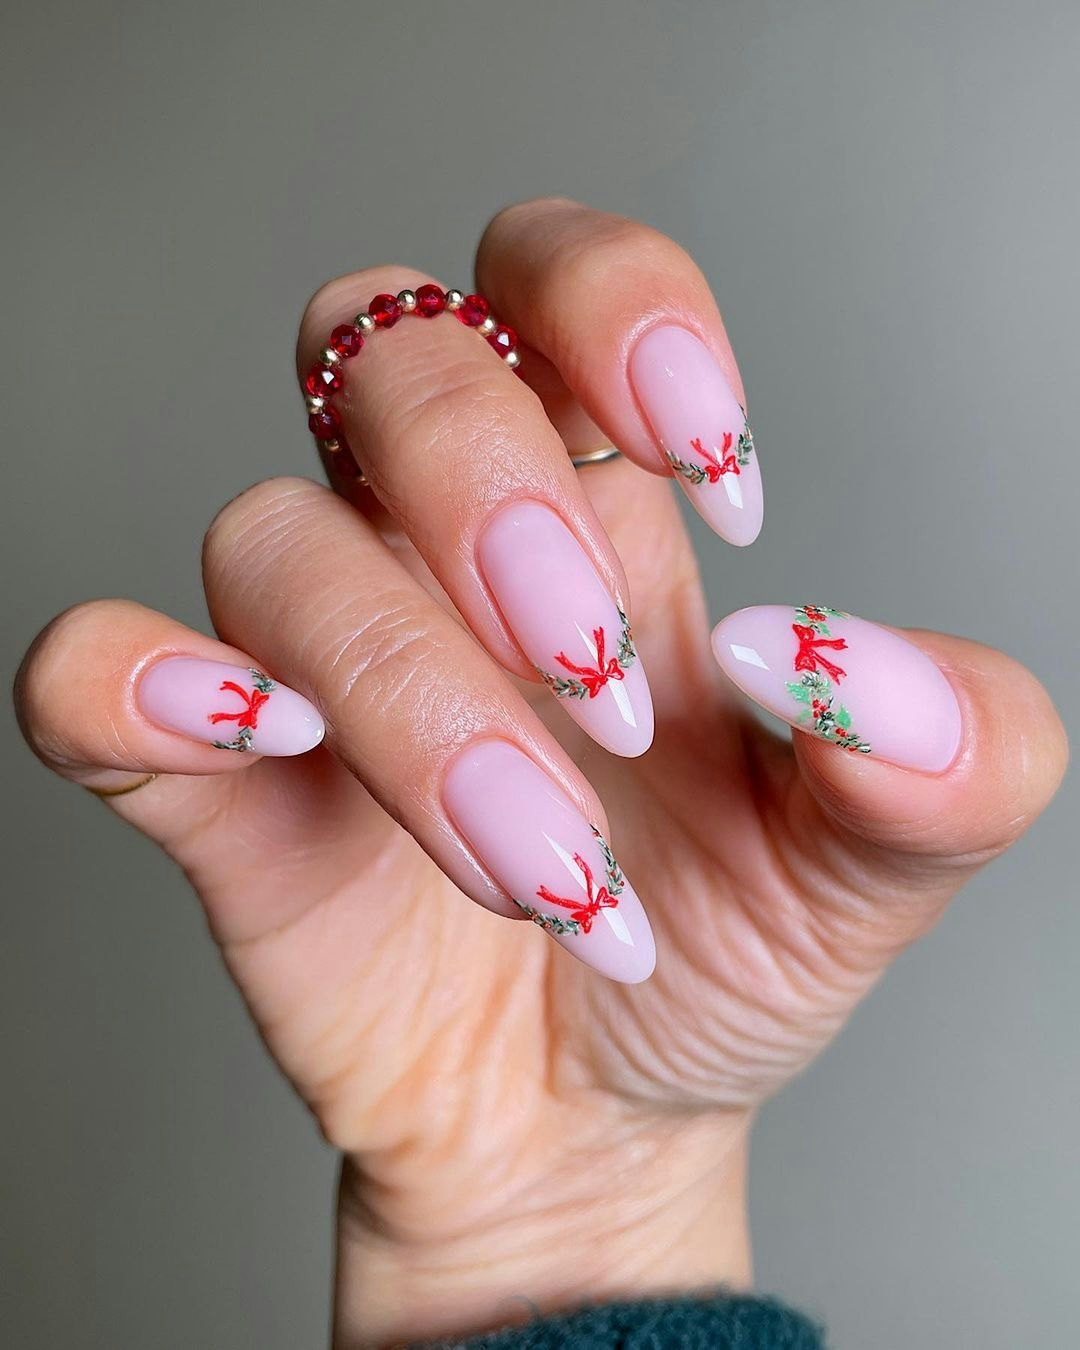 45 Beautiful Festive Nails To Merry The Season : Red Candy Cane + French